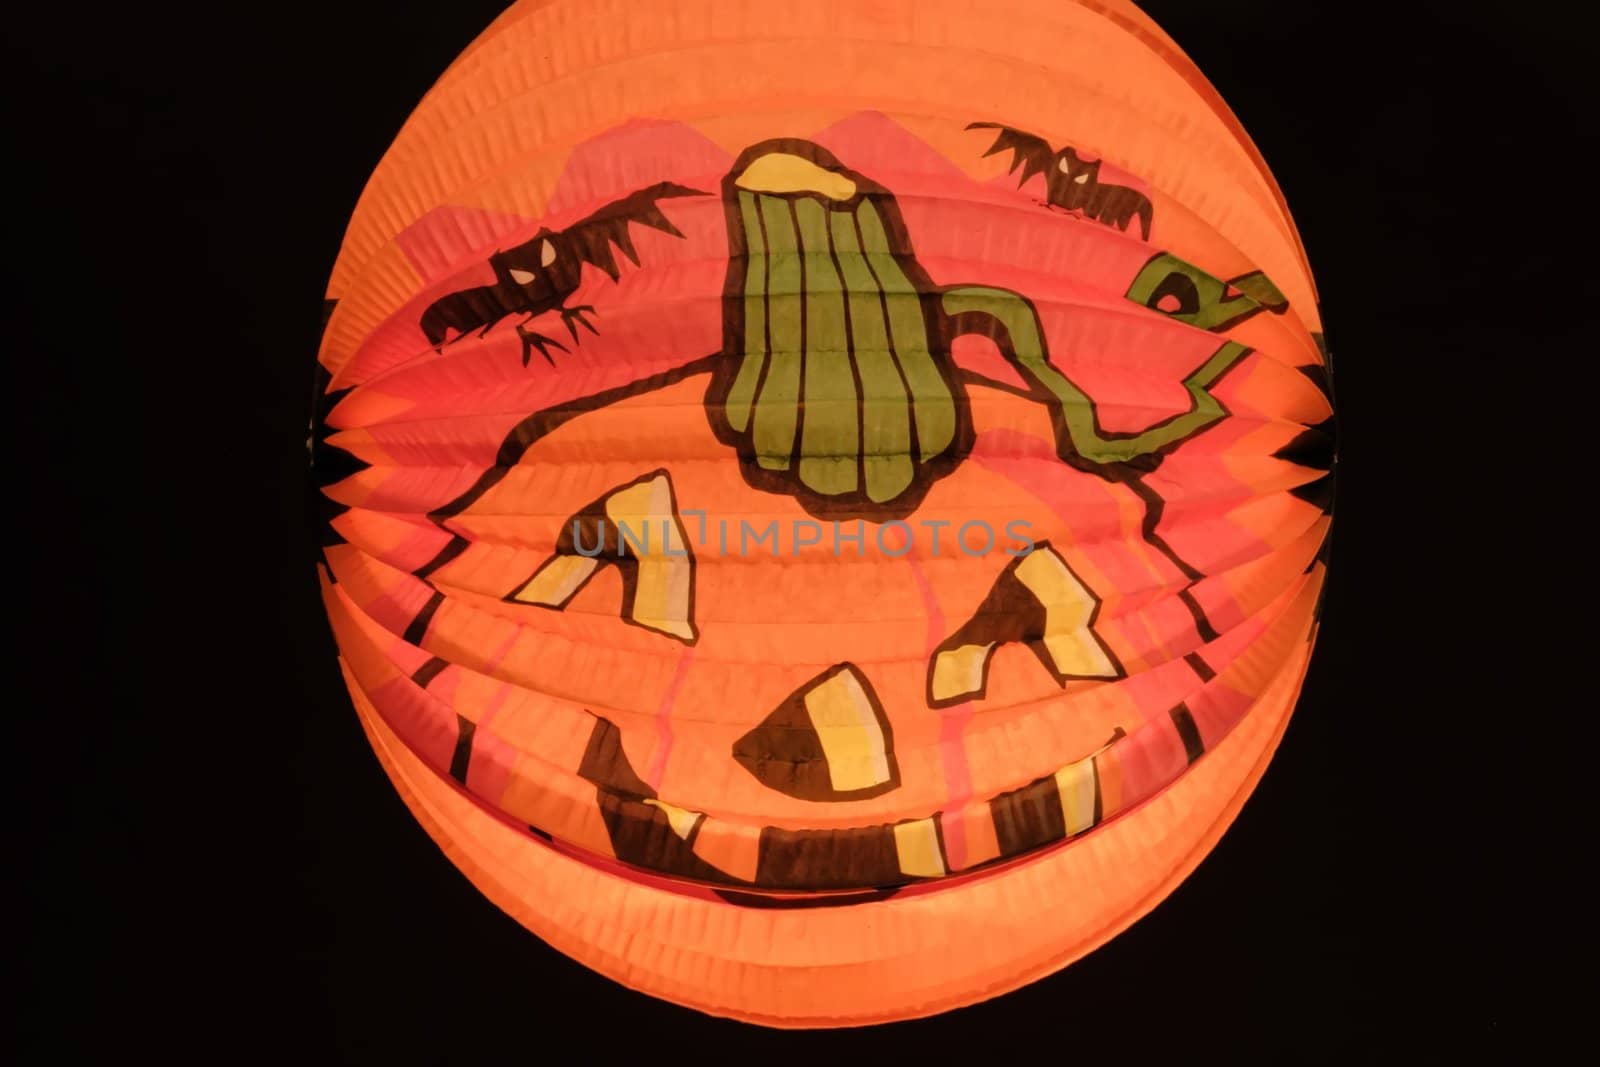 Paper lantern with pumpkin-face - isolated on black background